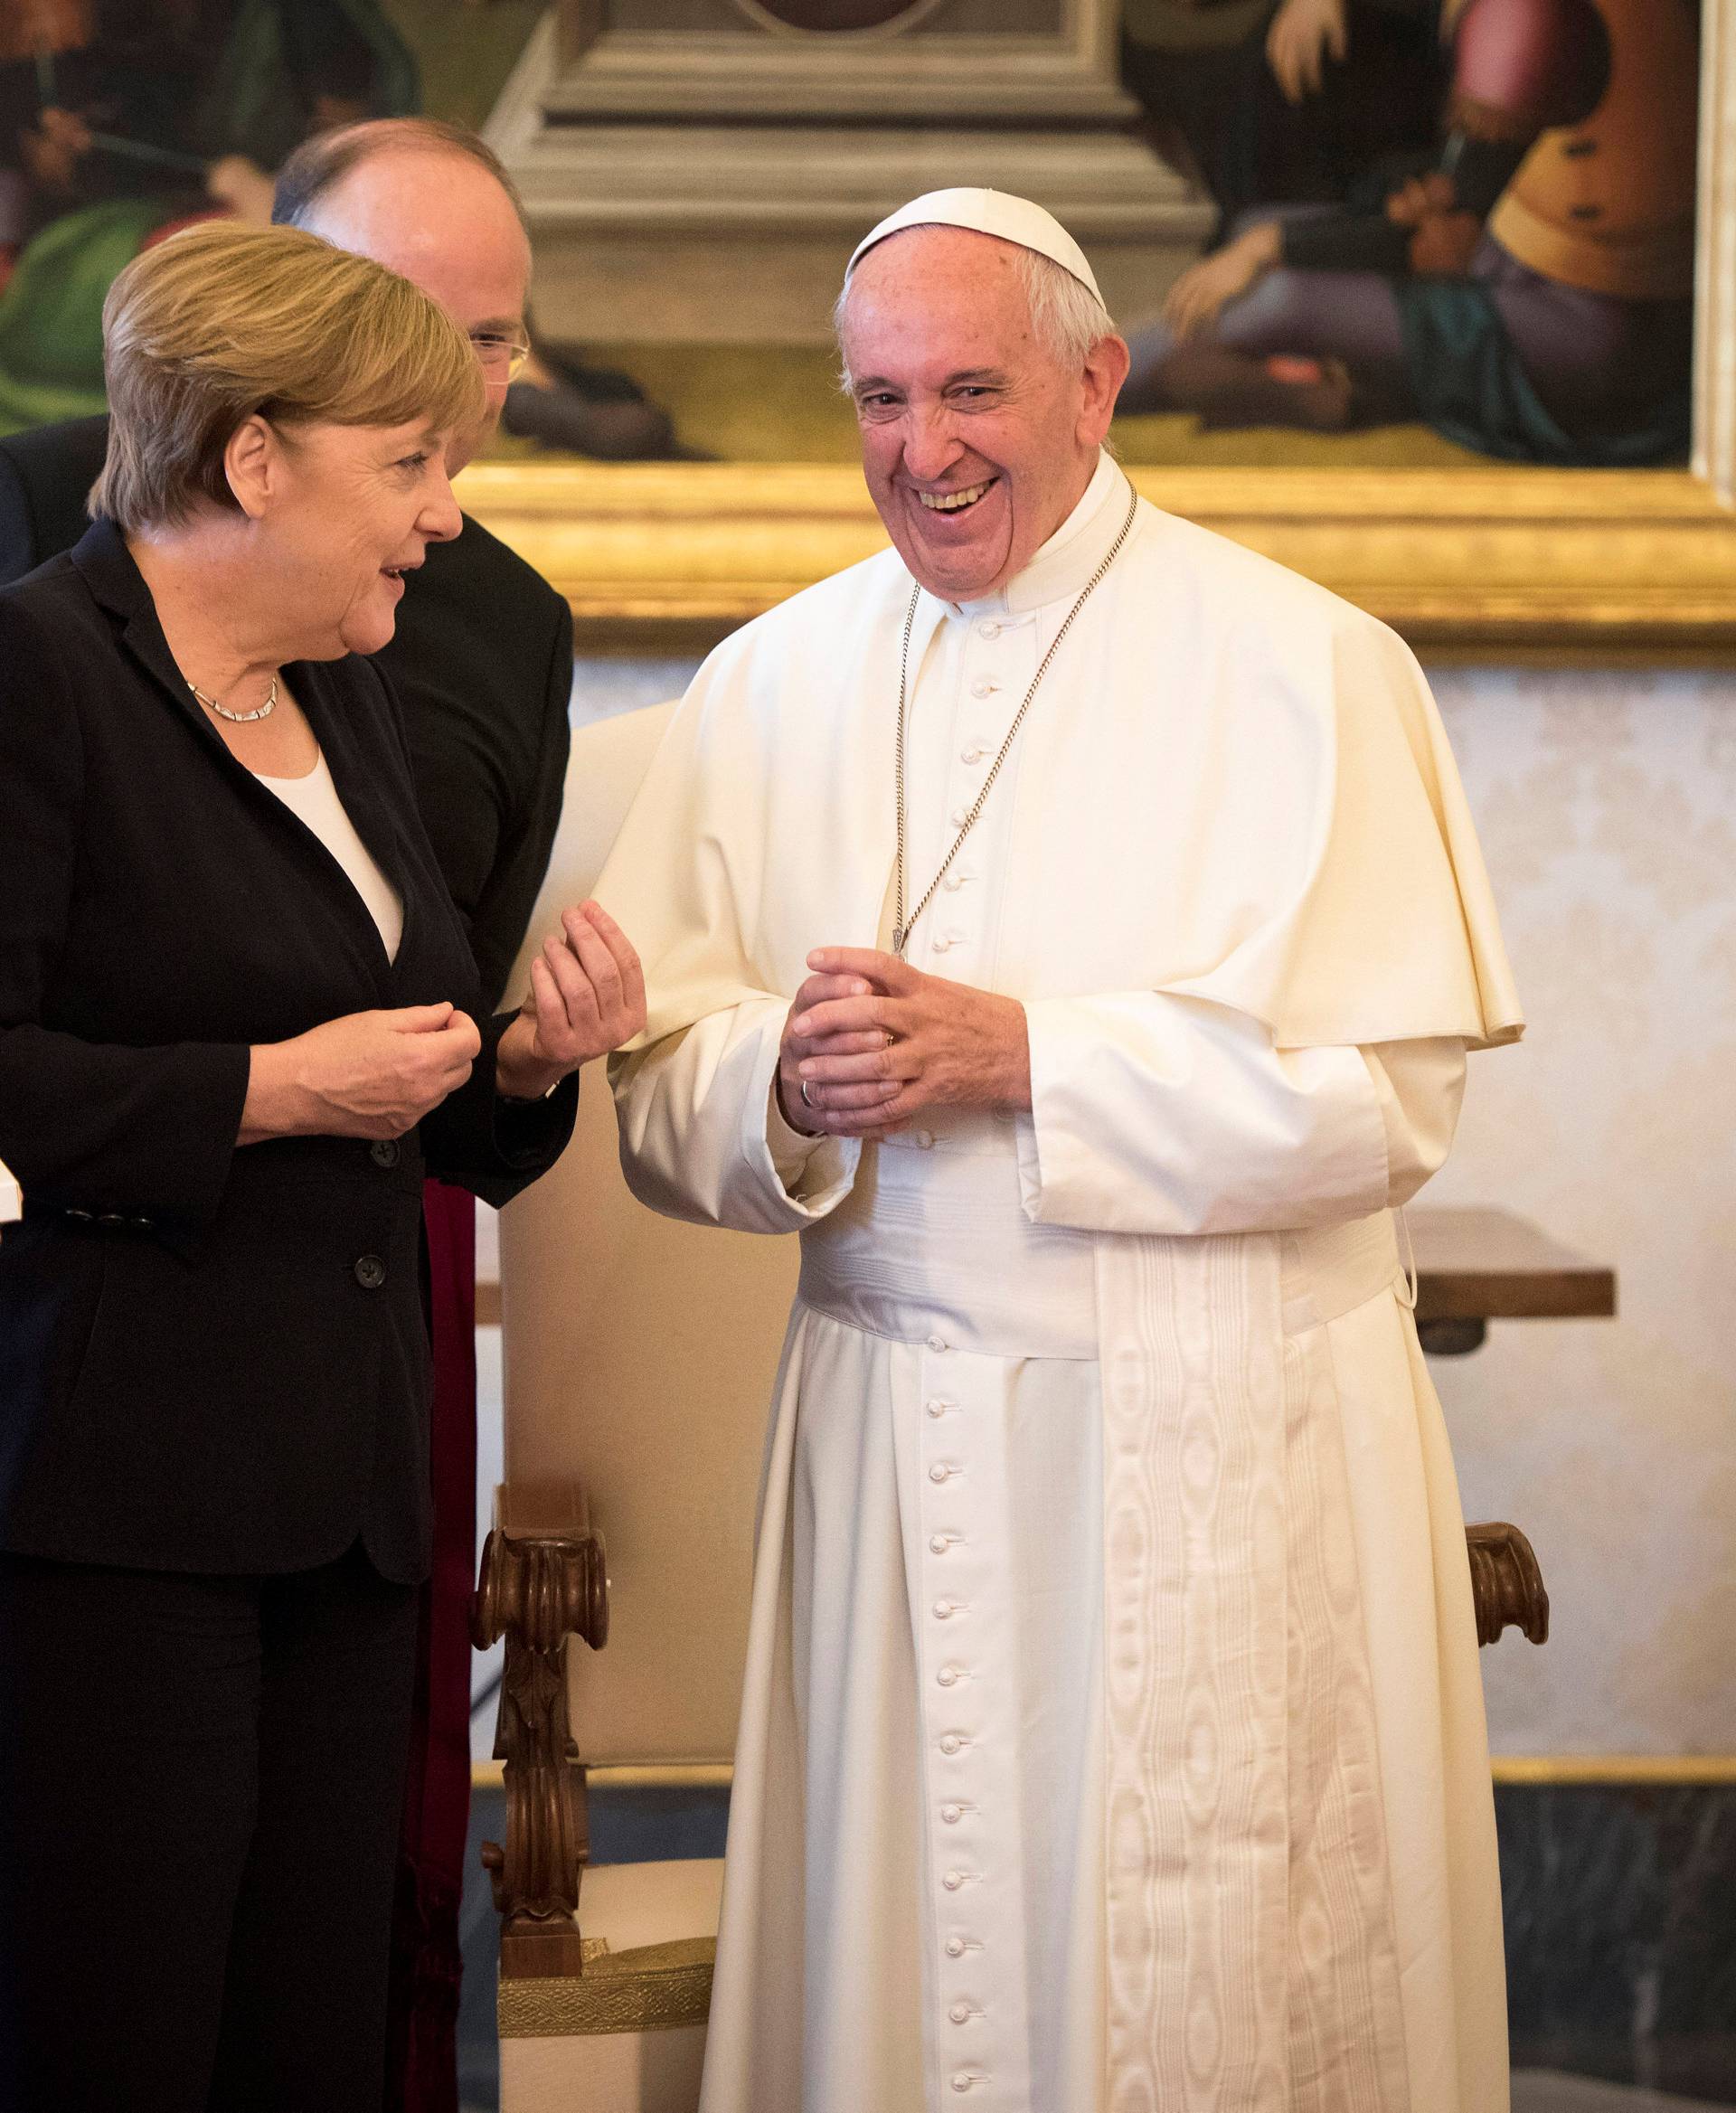 German Chancellor Angela Merkel and her husband Joachim Sauer talk with Pope Francis during a meeting at the Vatican